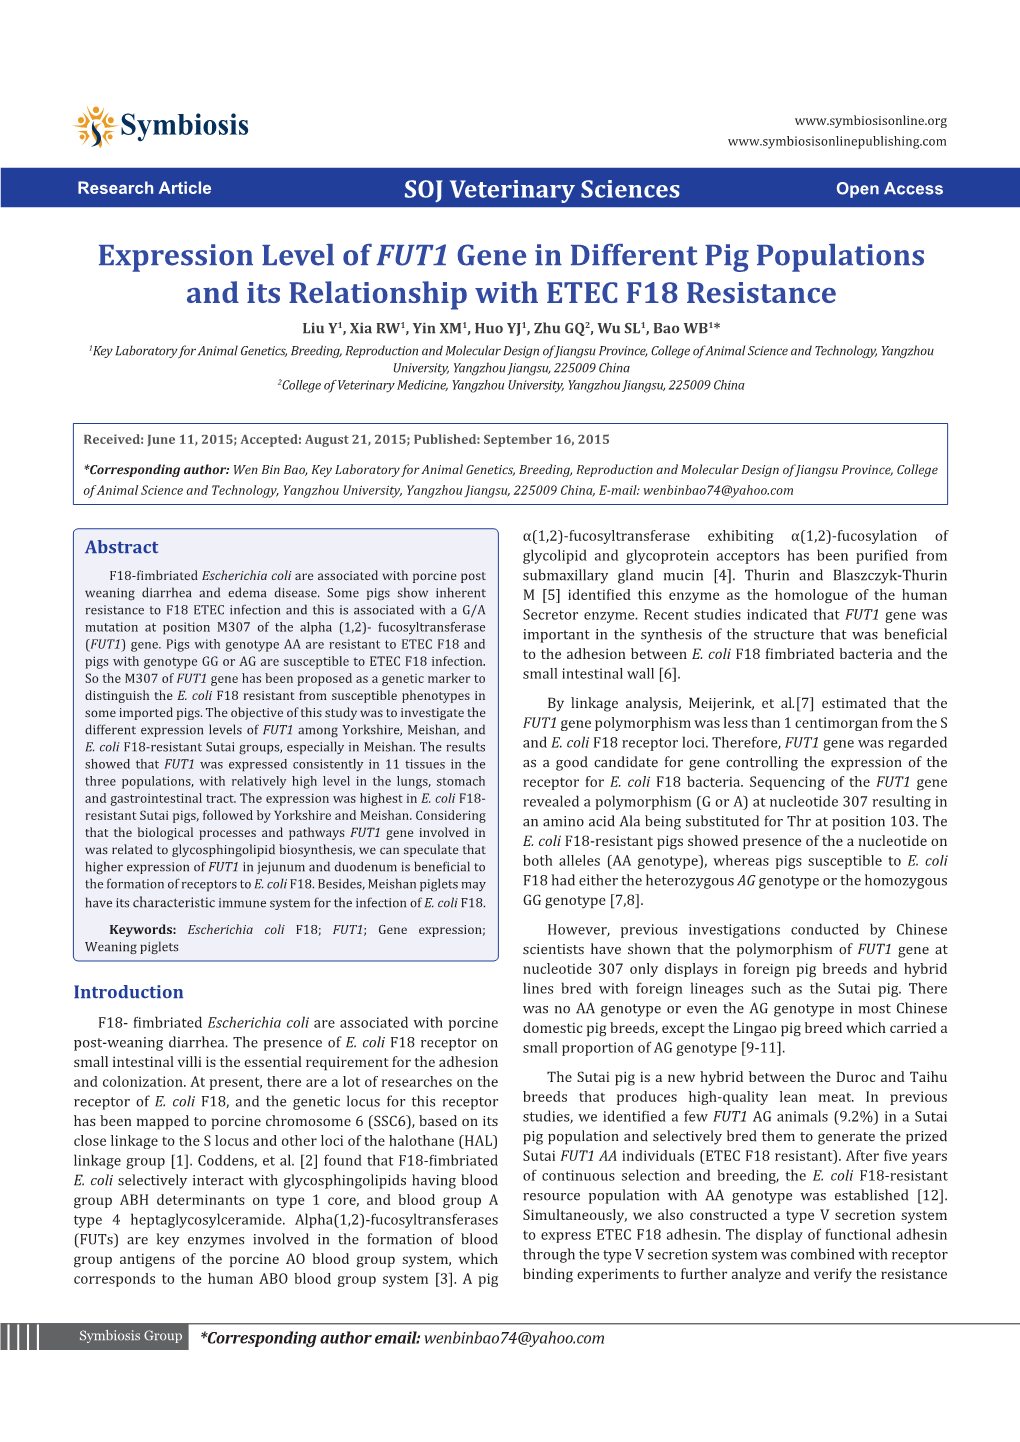 Expression Level of FUT1 Gene in Different Pig Populations and Its Relationship with ETEC F18 Resistance